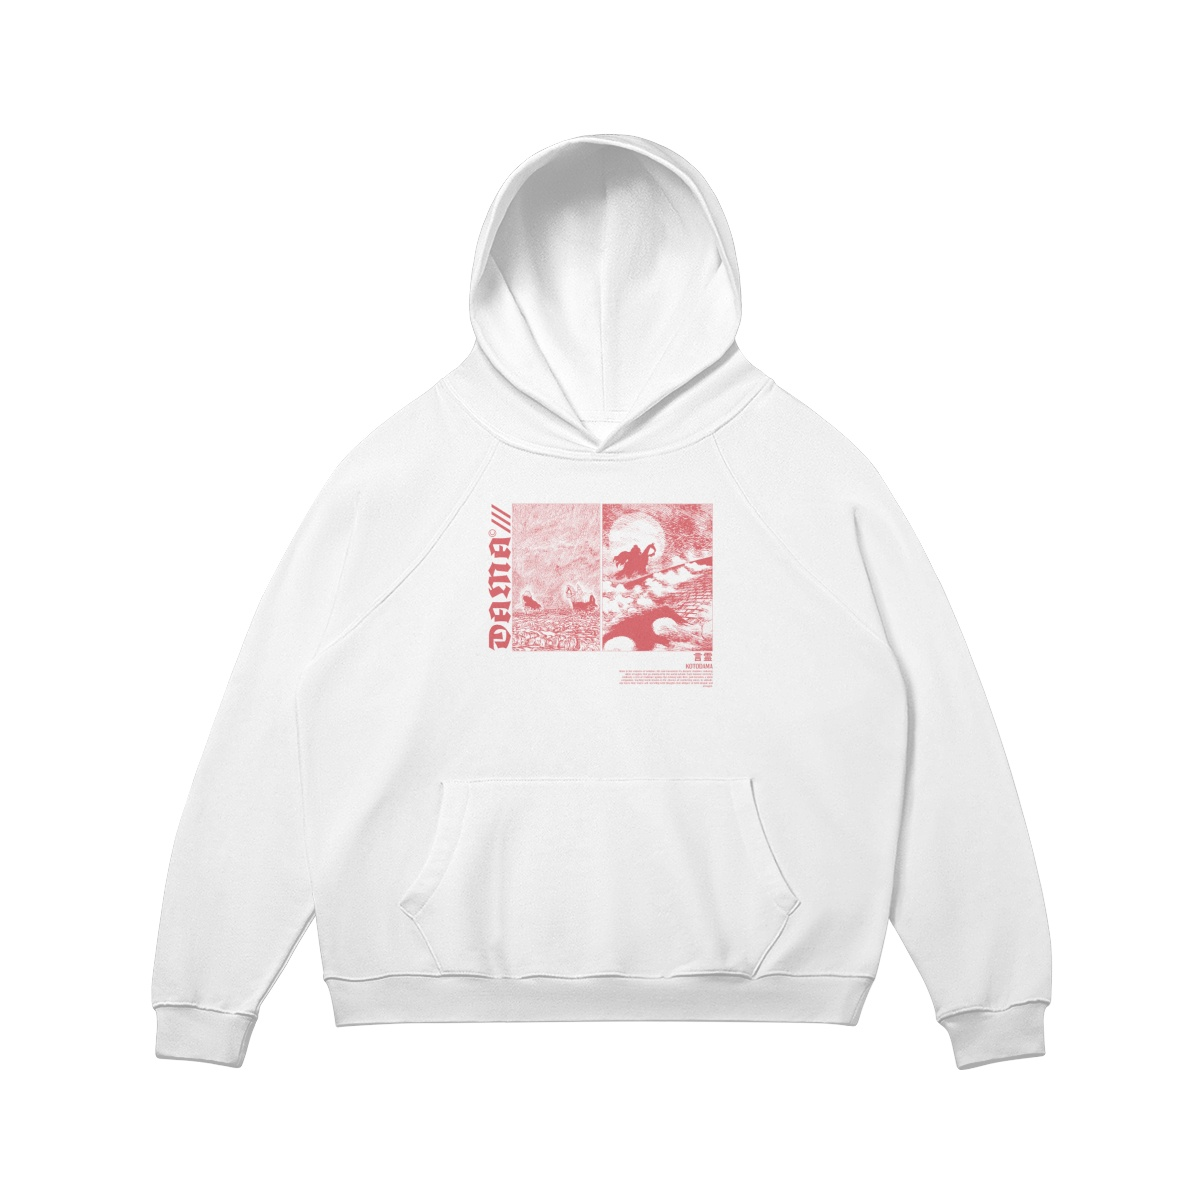 Berserk Hoodie | Limited Edition Anime Inspired Collection